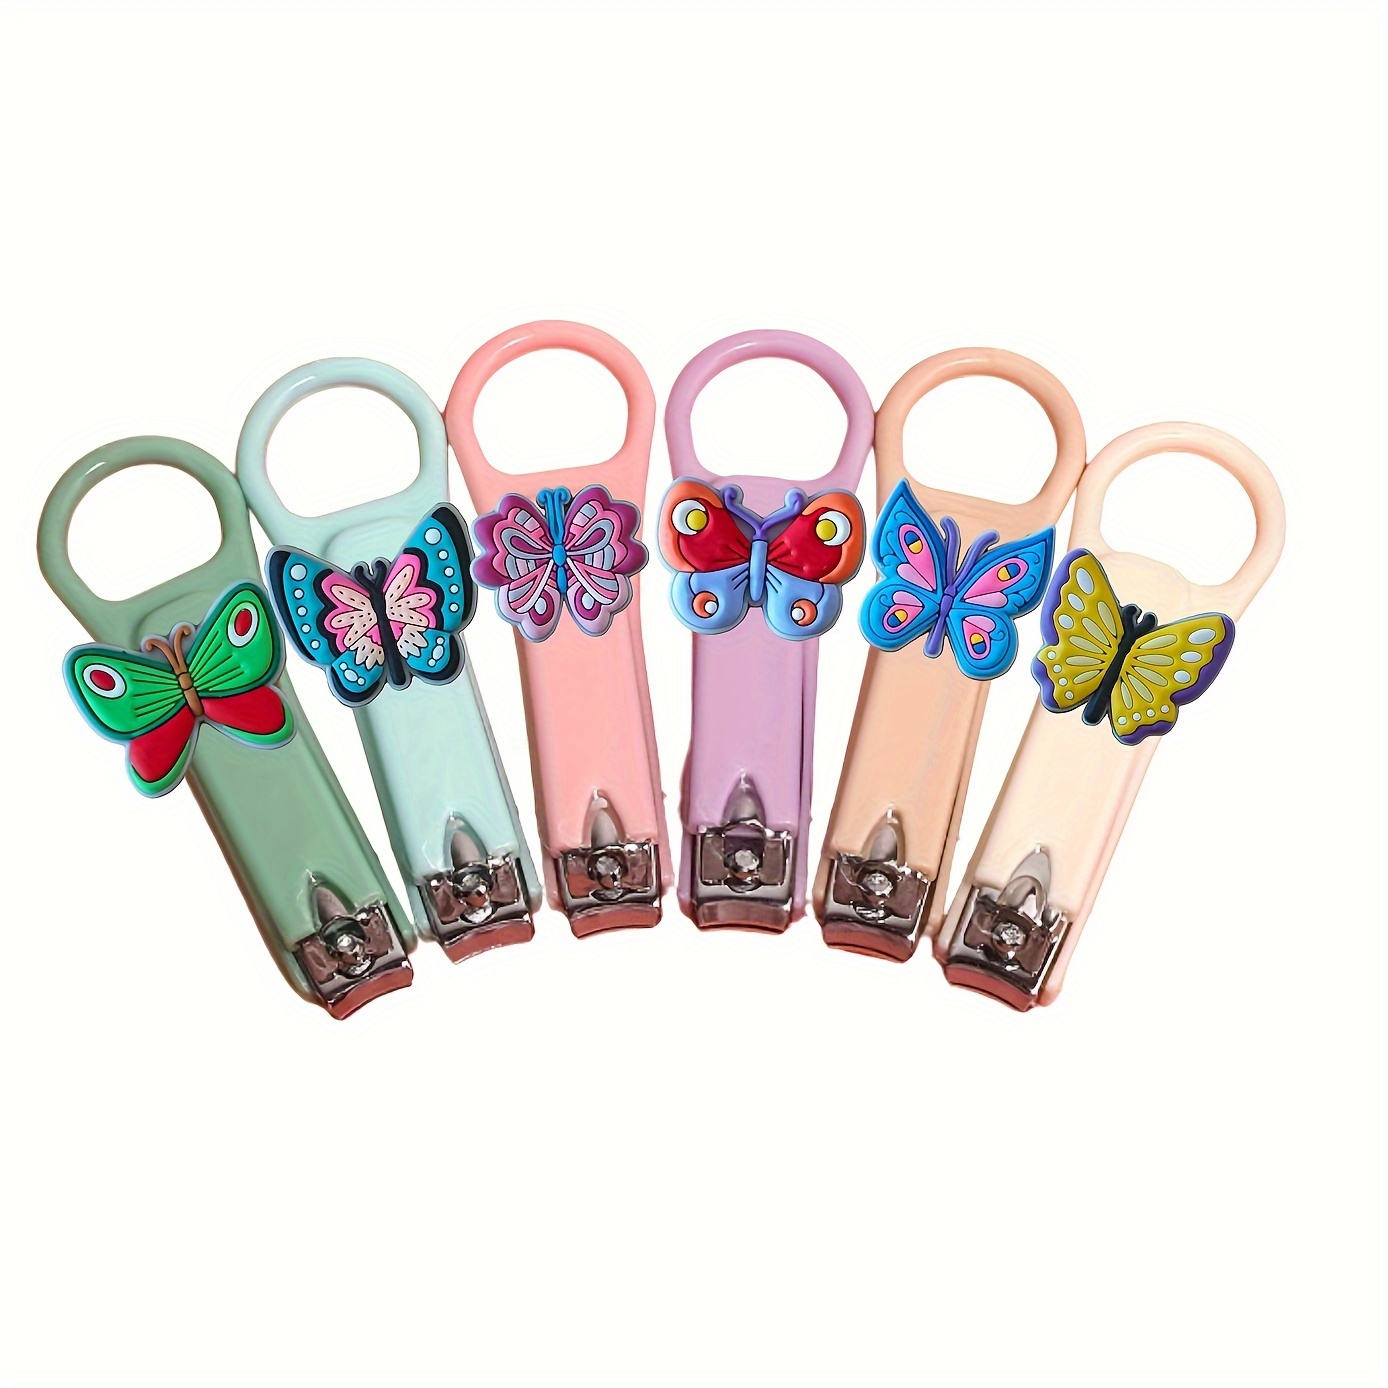 Adorable Cartoon Animal Infant Professional Nail Tip Cutter With Key Chain  M2044 From Hltrading, $0.46 | DHgate.Com